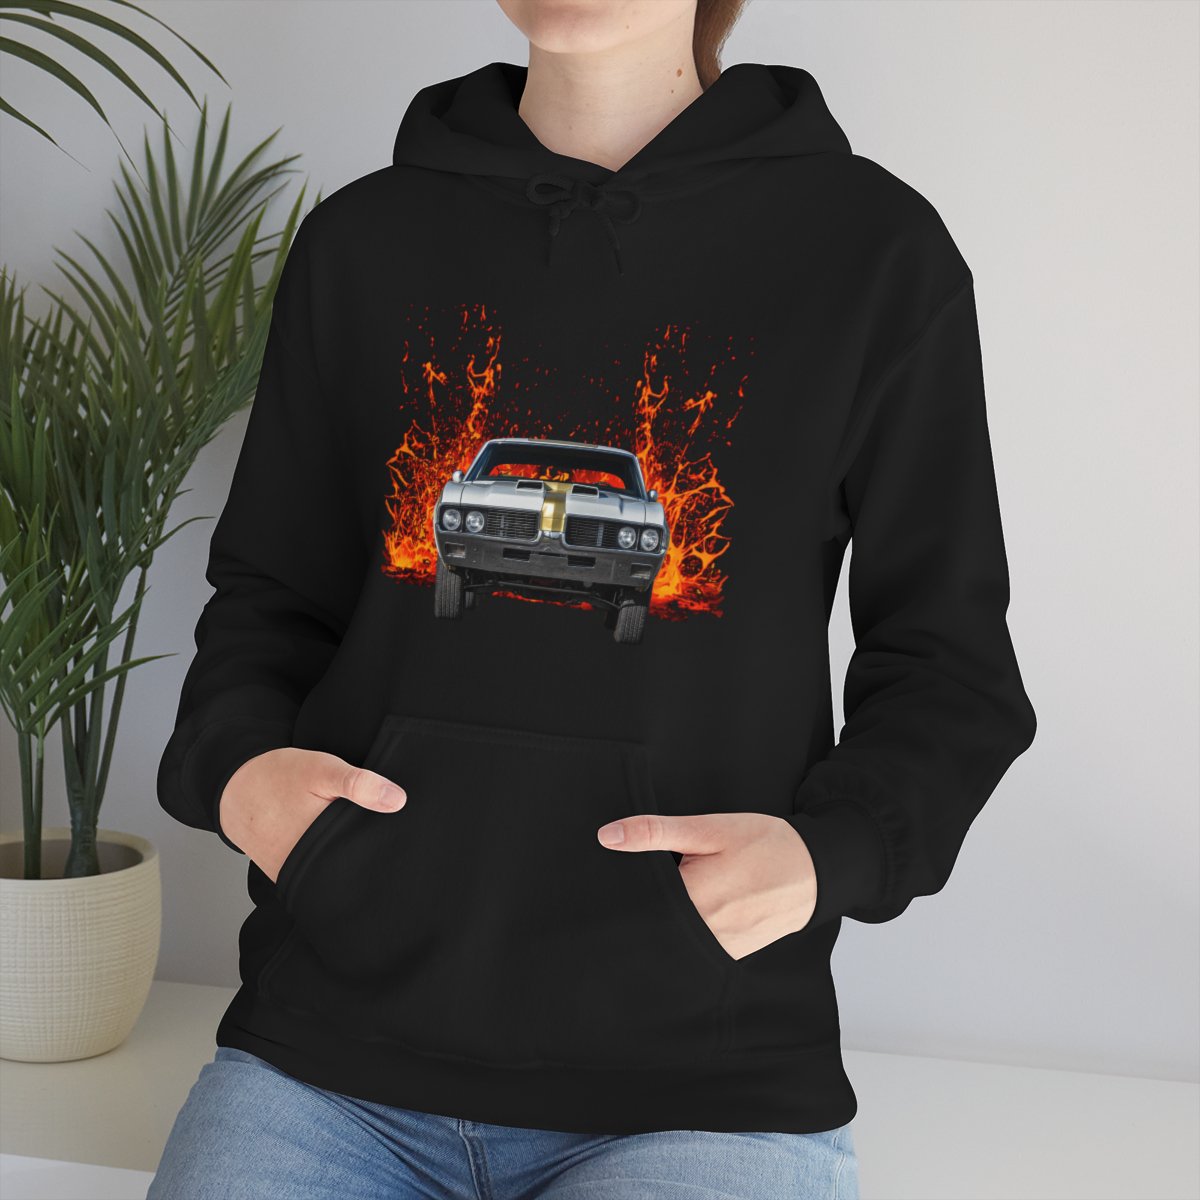 New 1969 Hurst Olds Cutlass 442 in our lava series Hoodie Free Shipping!